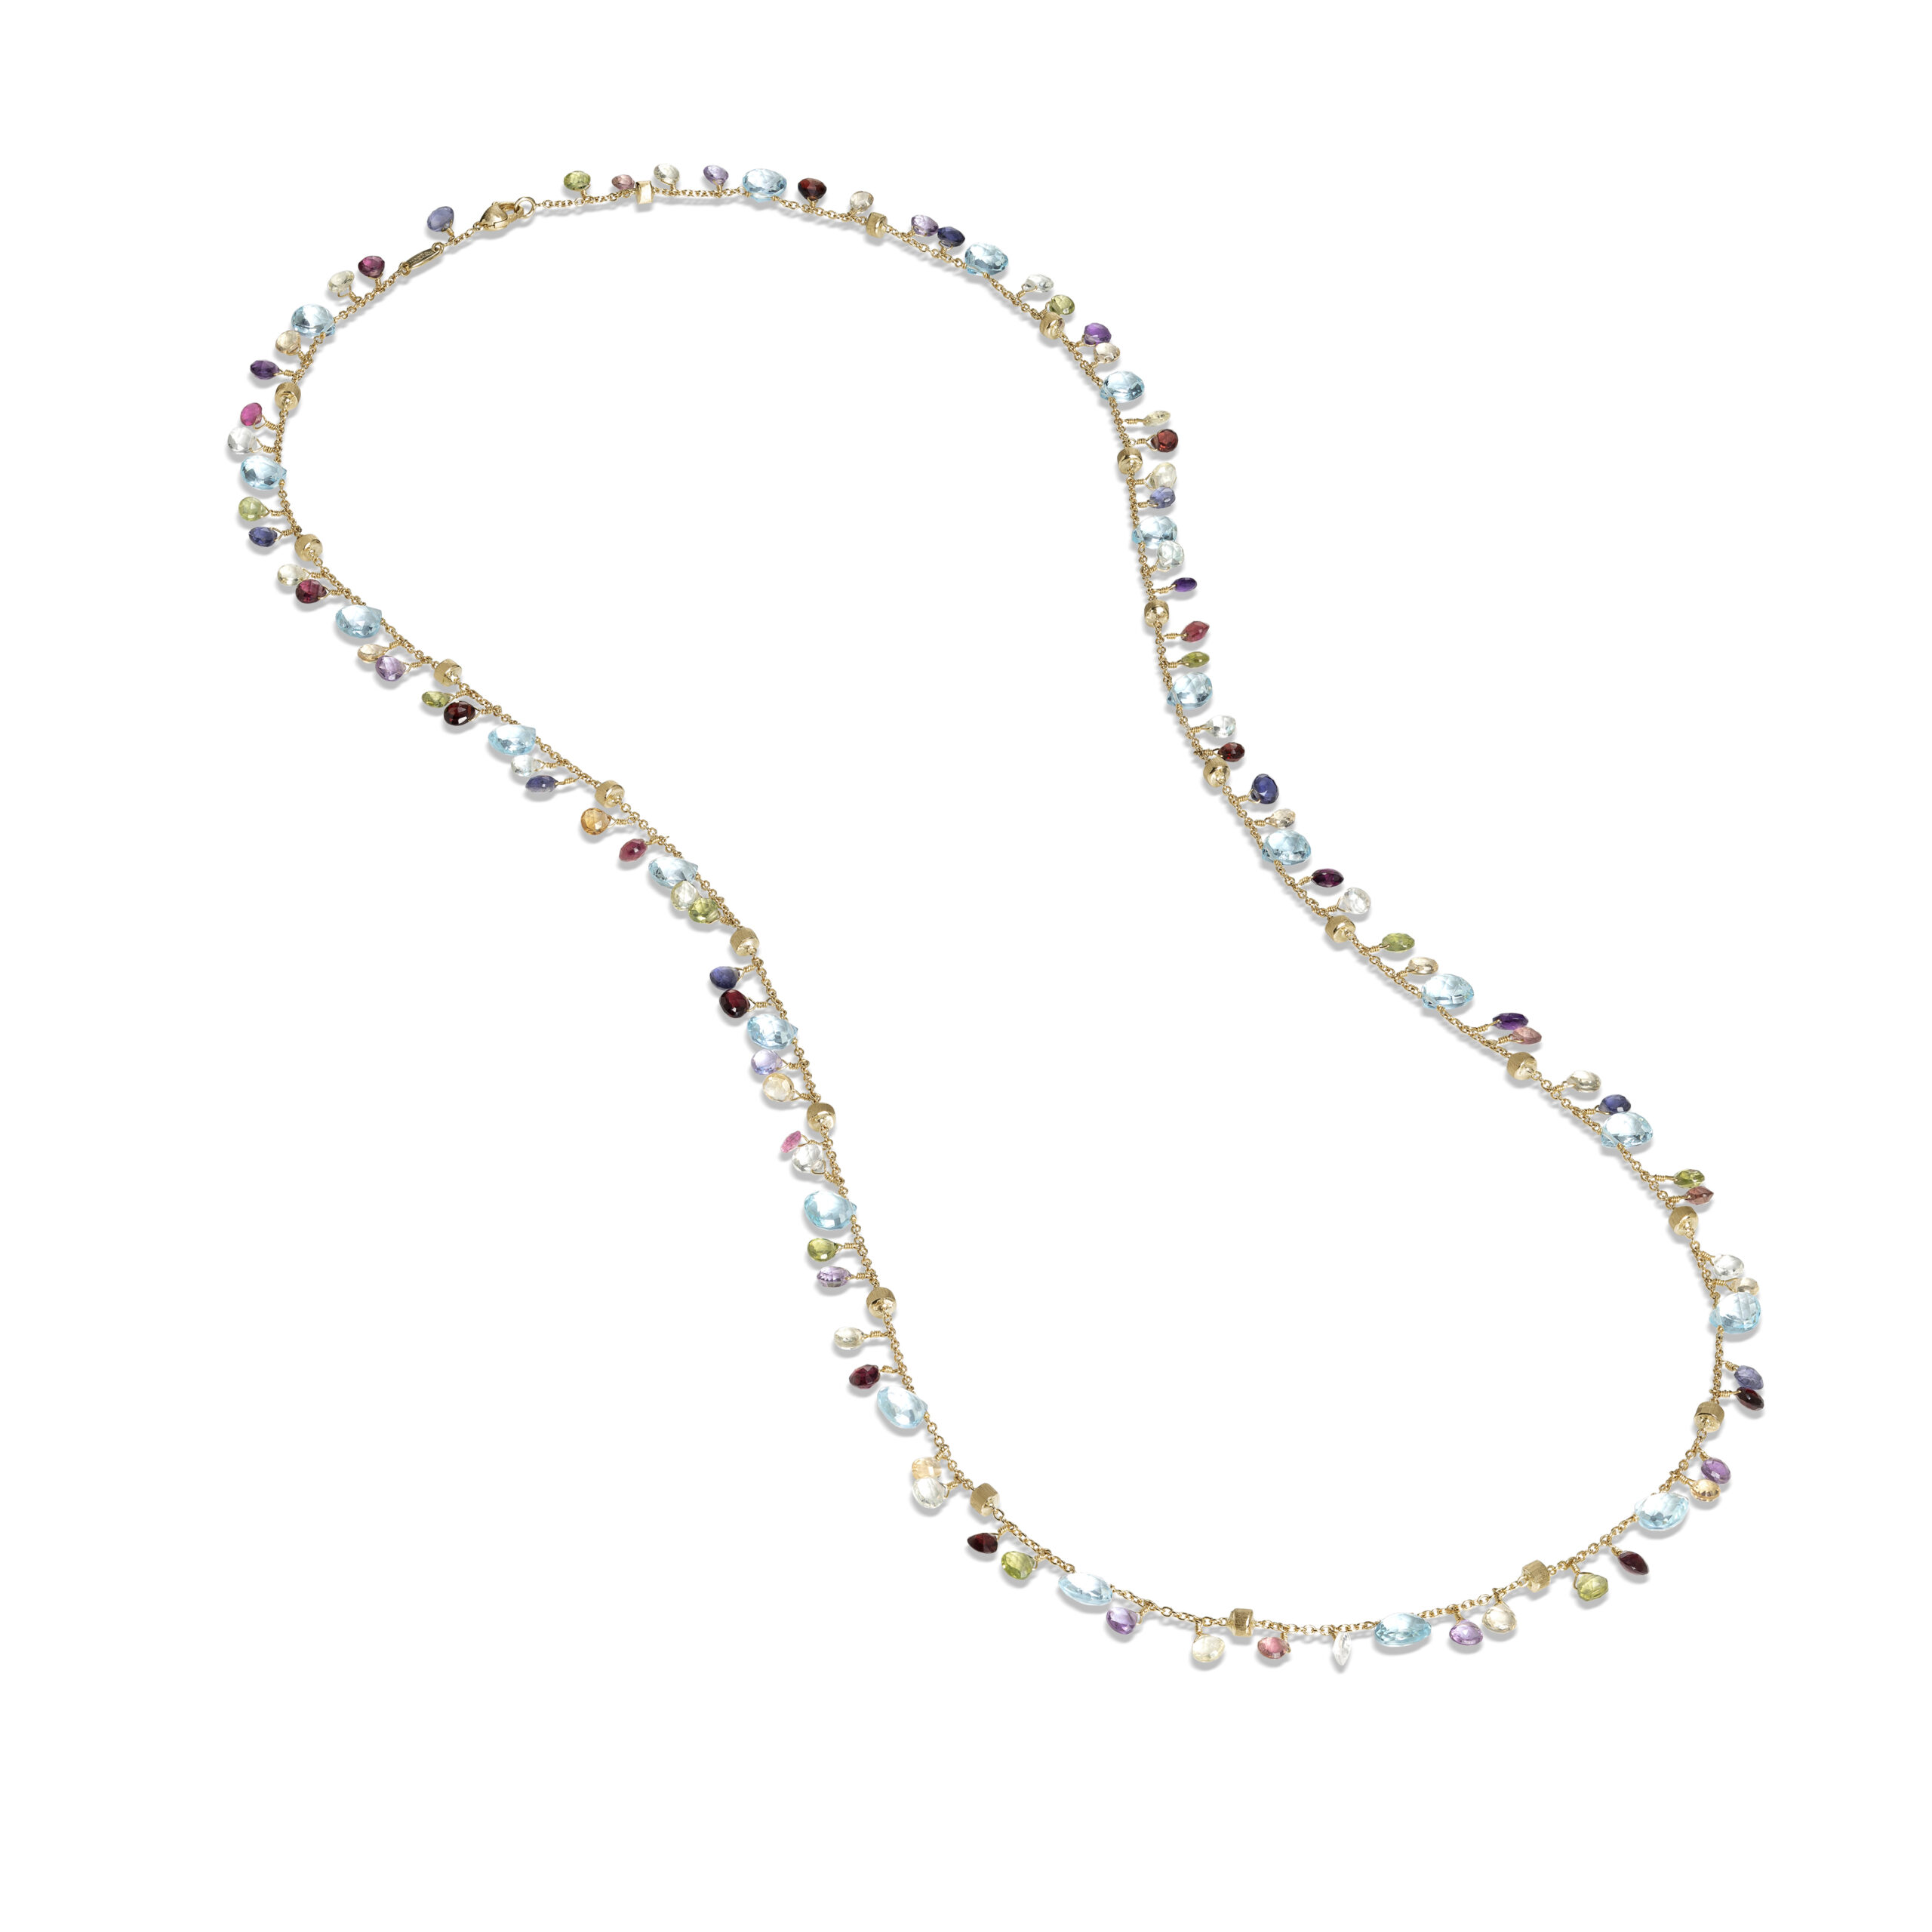 CB2585 MIX01T Y 02Marco Bicego Paradise Collection 18k Yellow Gold Blue Topaz and Mixed Gemstone Long Necklace